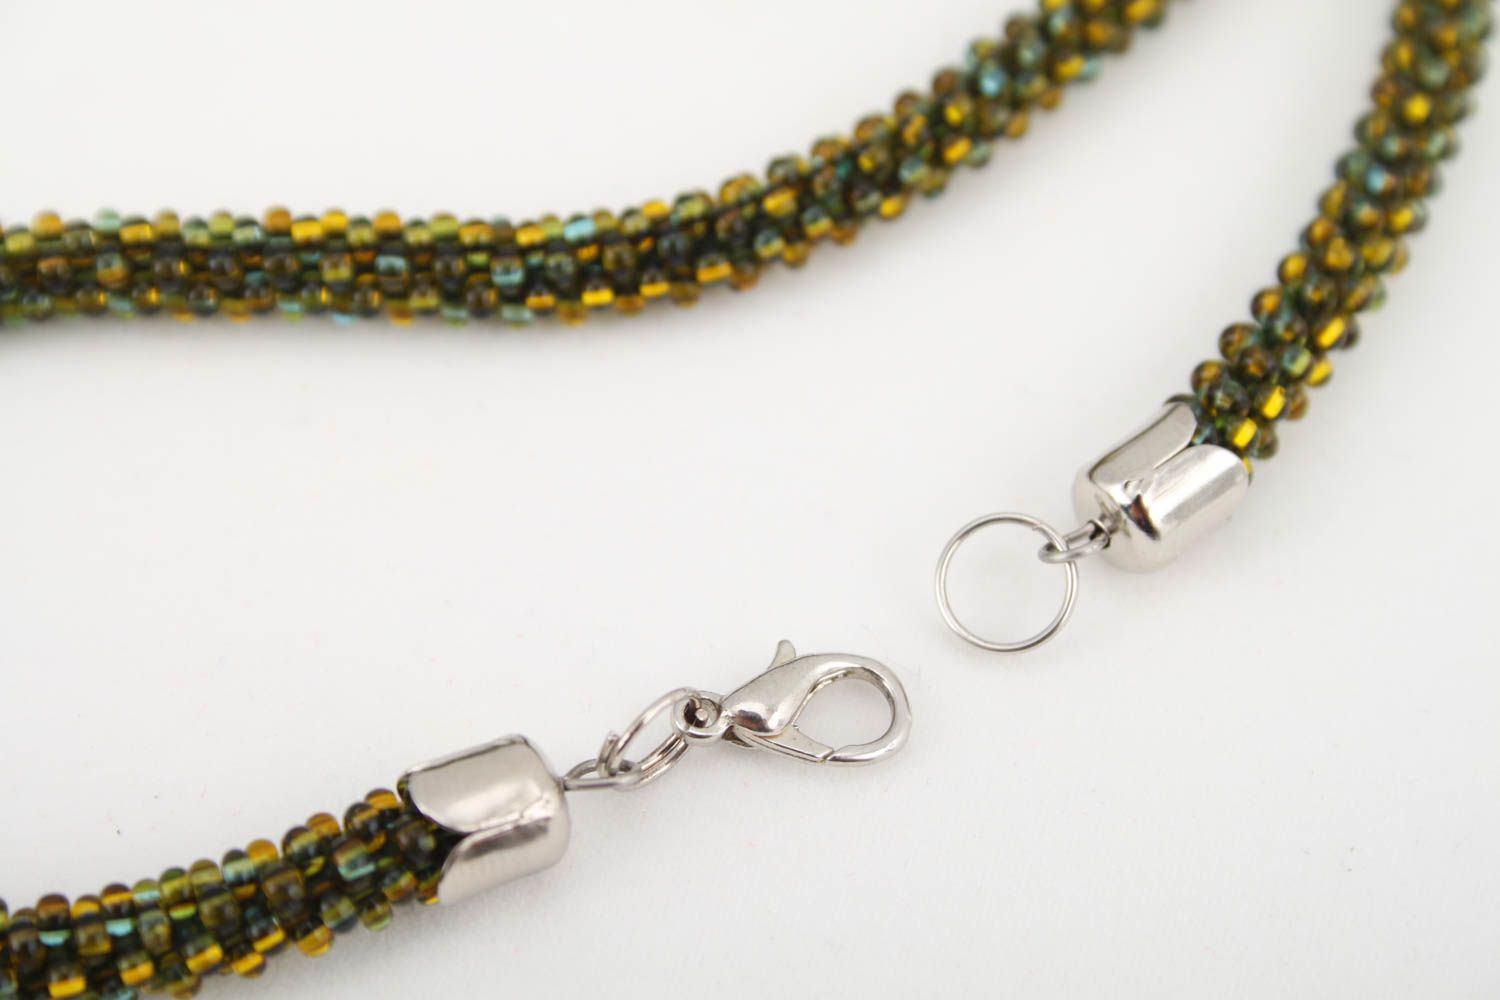 Handmade beaded necklace handmade necklace with natural stones fashion jewelry photo 5